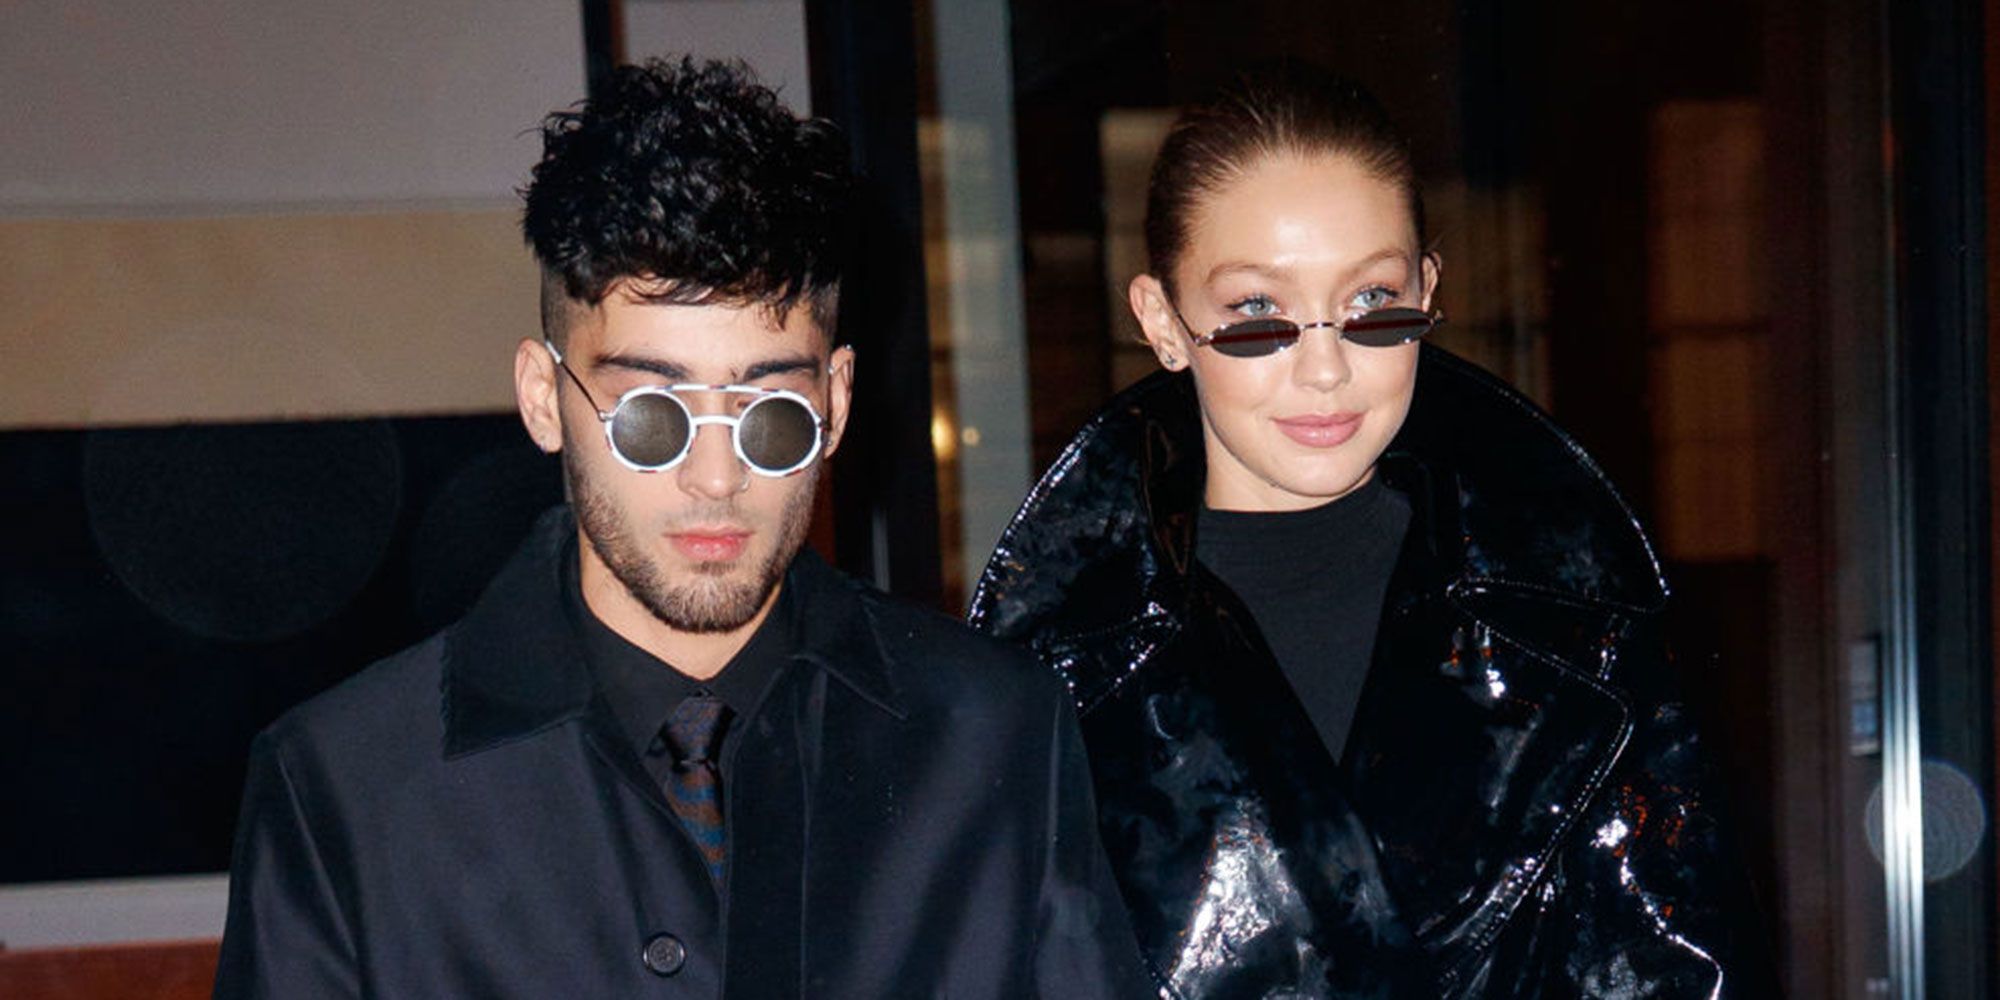 Why Gigi And Zayn's Breakup Bums Me Out